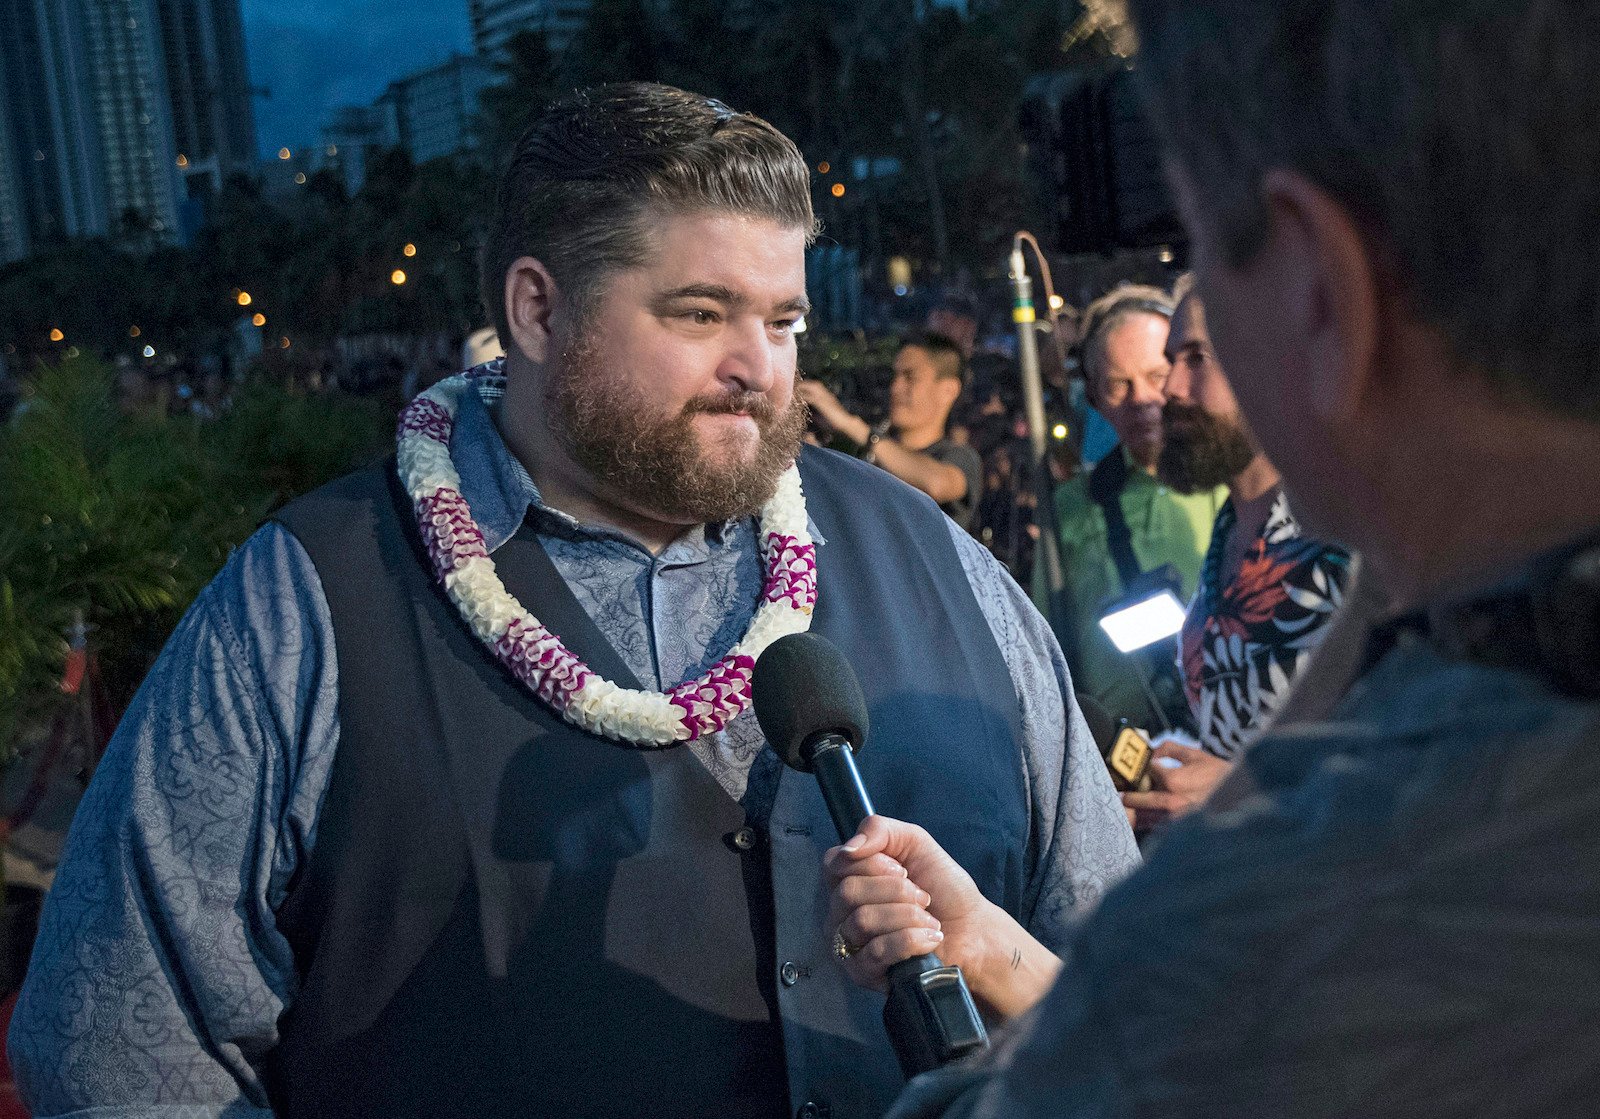 Jorge Garcia is interviewed by the media on the red carpet at the eighth annual Sunset on the Beach event